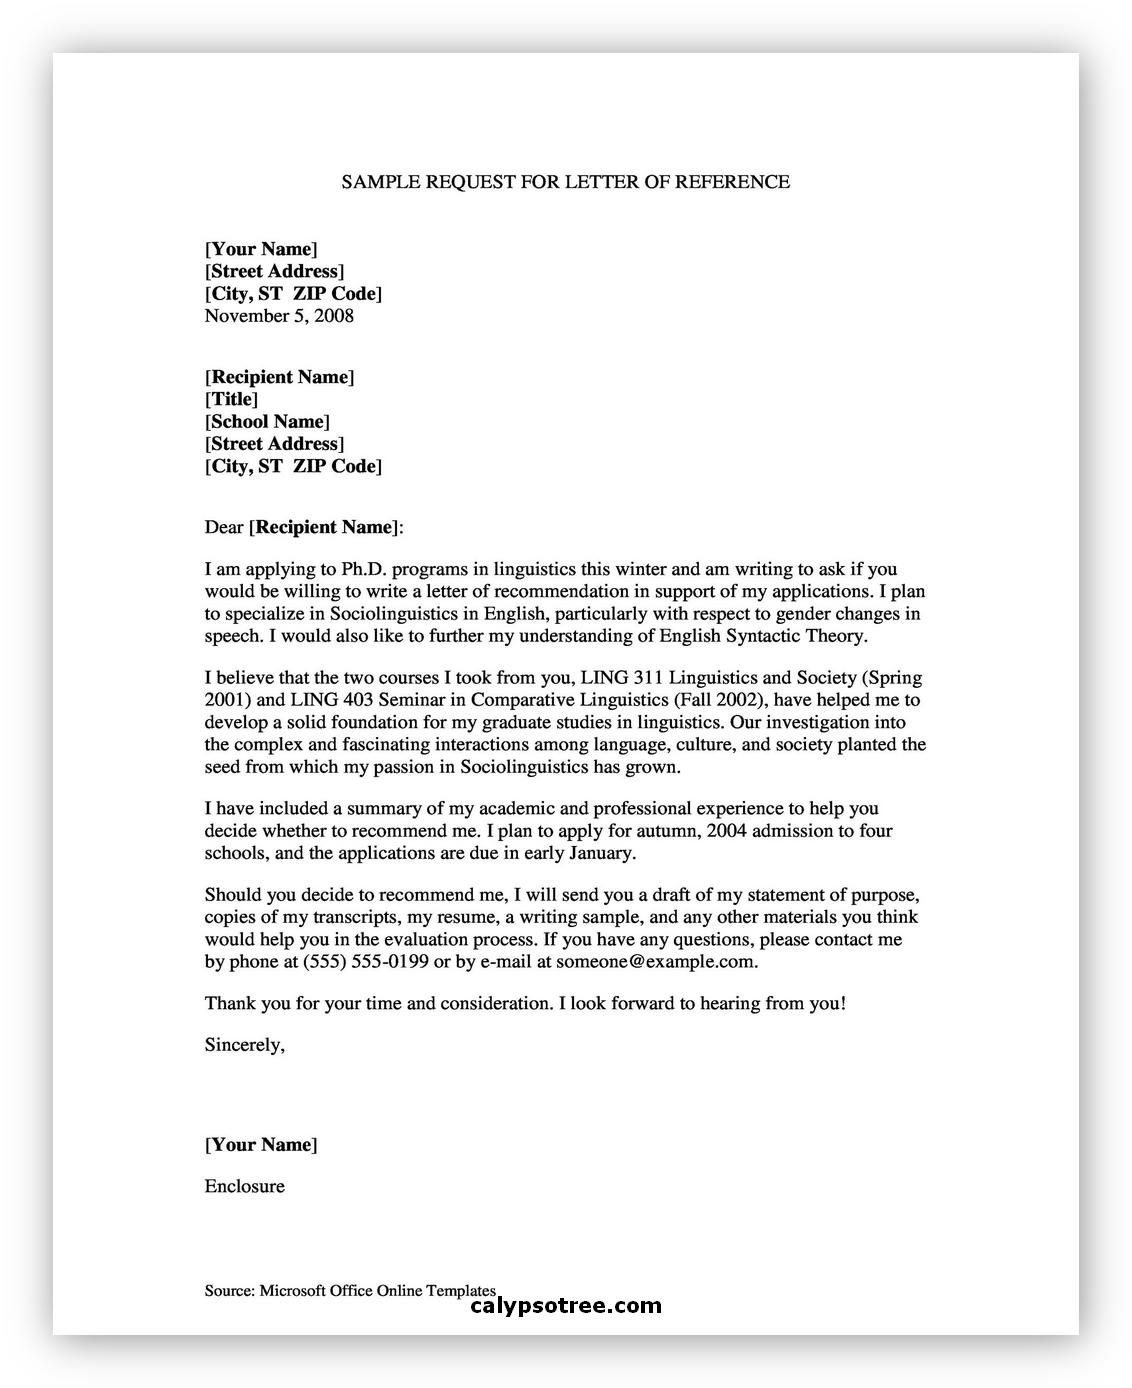 Letter of Recommendation Sample 05